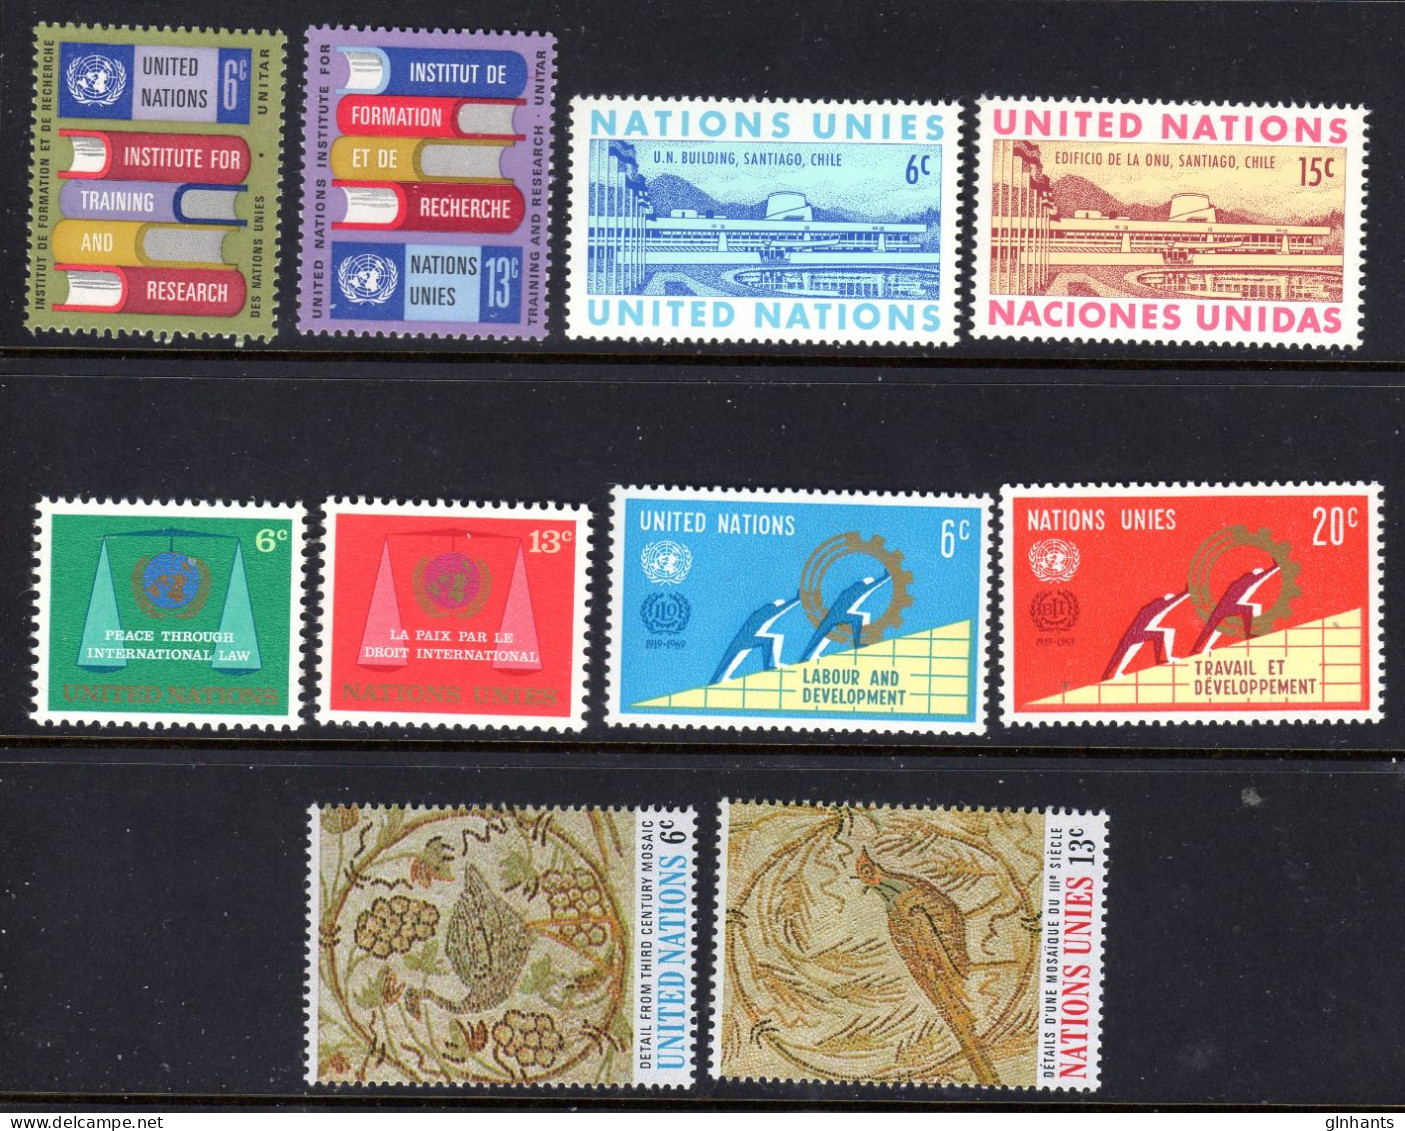 UNITED NATIONS UN NEW YORK - 1969 COMPLETE YEAR SET (10V) AS PICTURED FINE MNH ** SG 193-202 - Unused Stamps